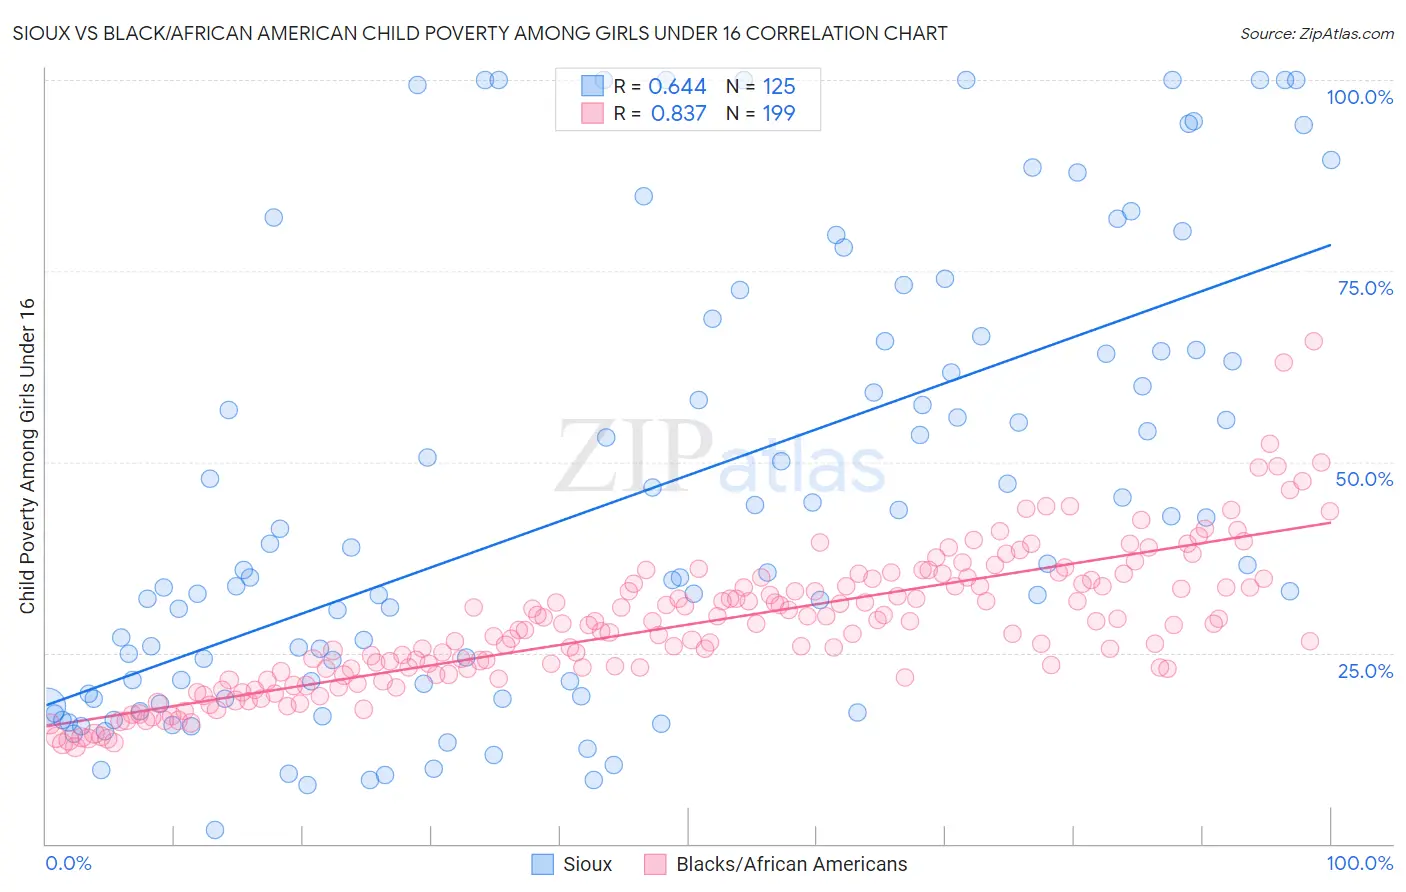 Sioux vs Black/African American Child Poverty Among Girls Under 16